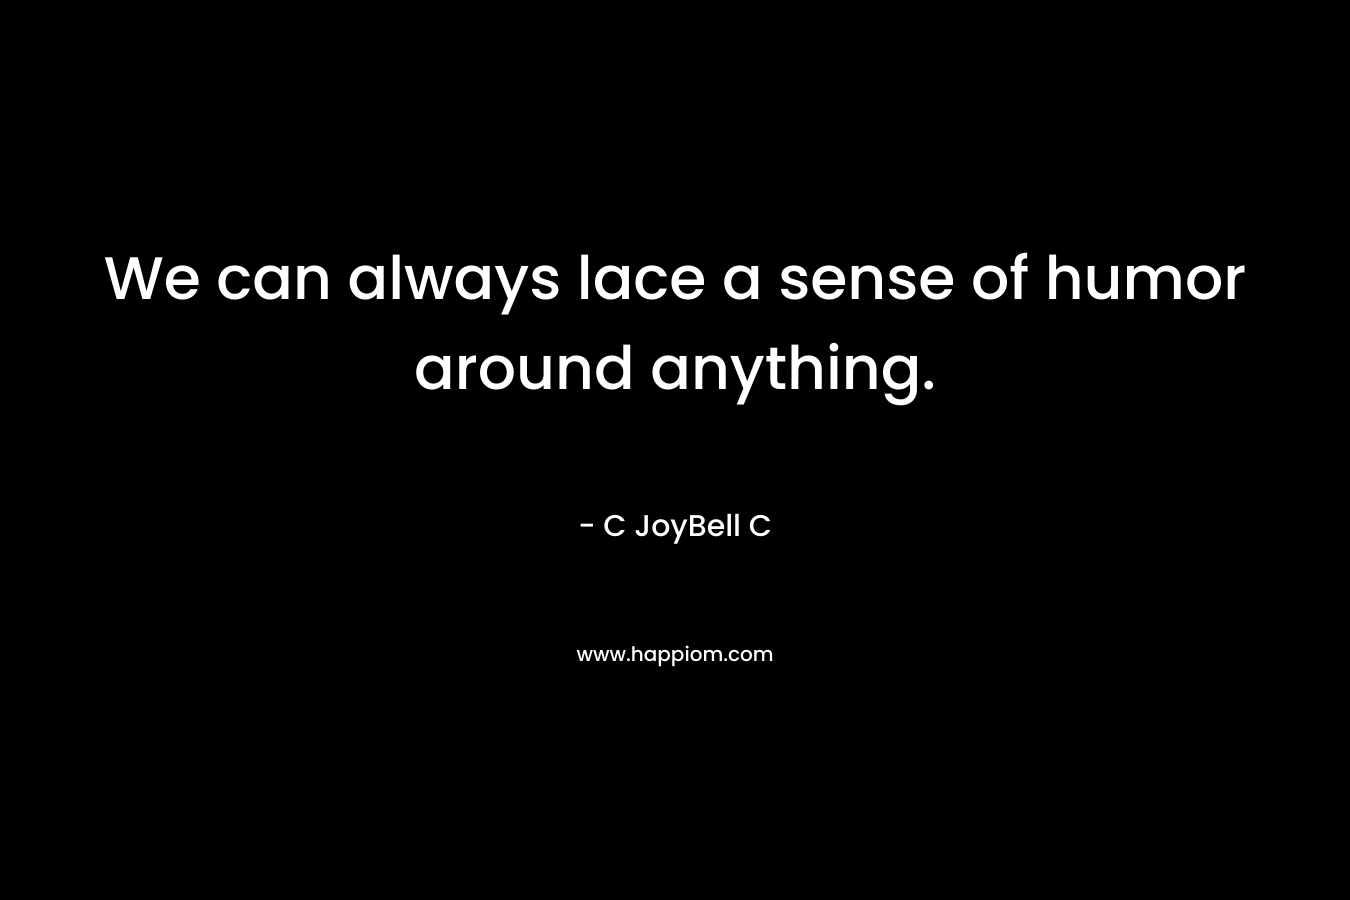 We can always lace a sense of humor around anything. – C JoyBell C